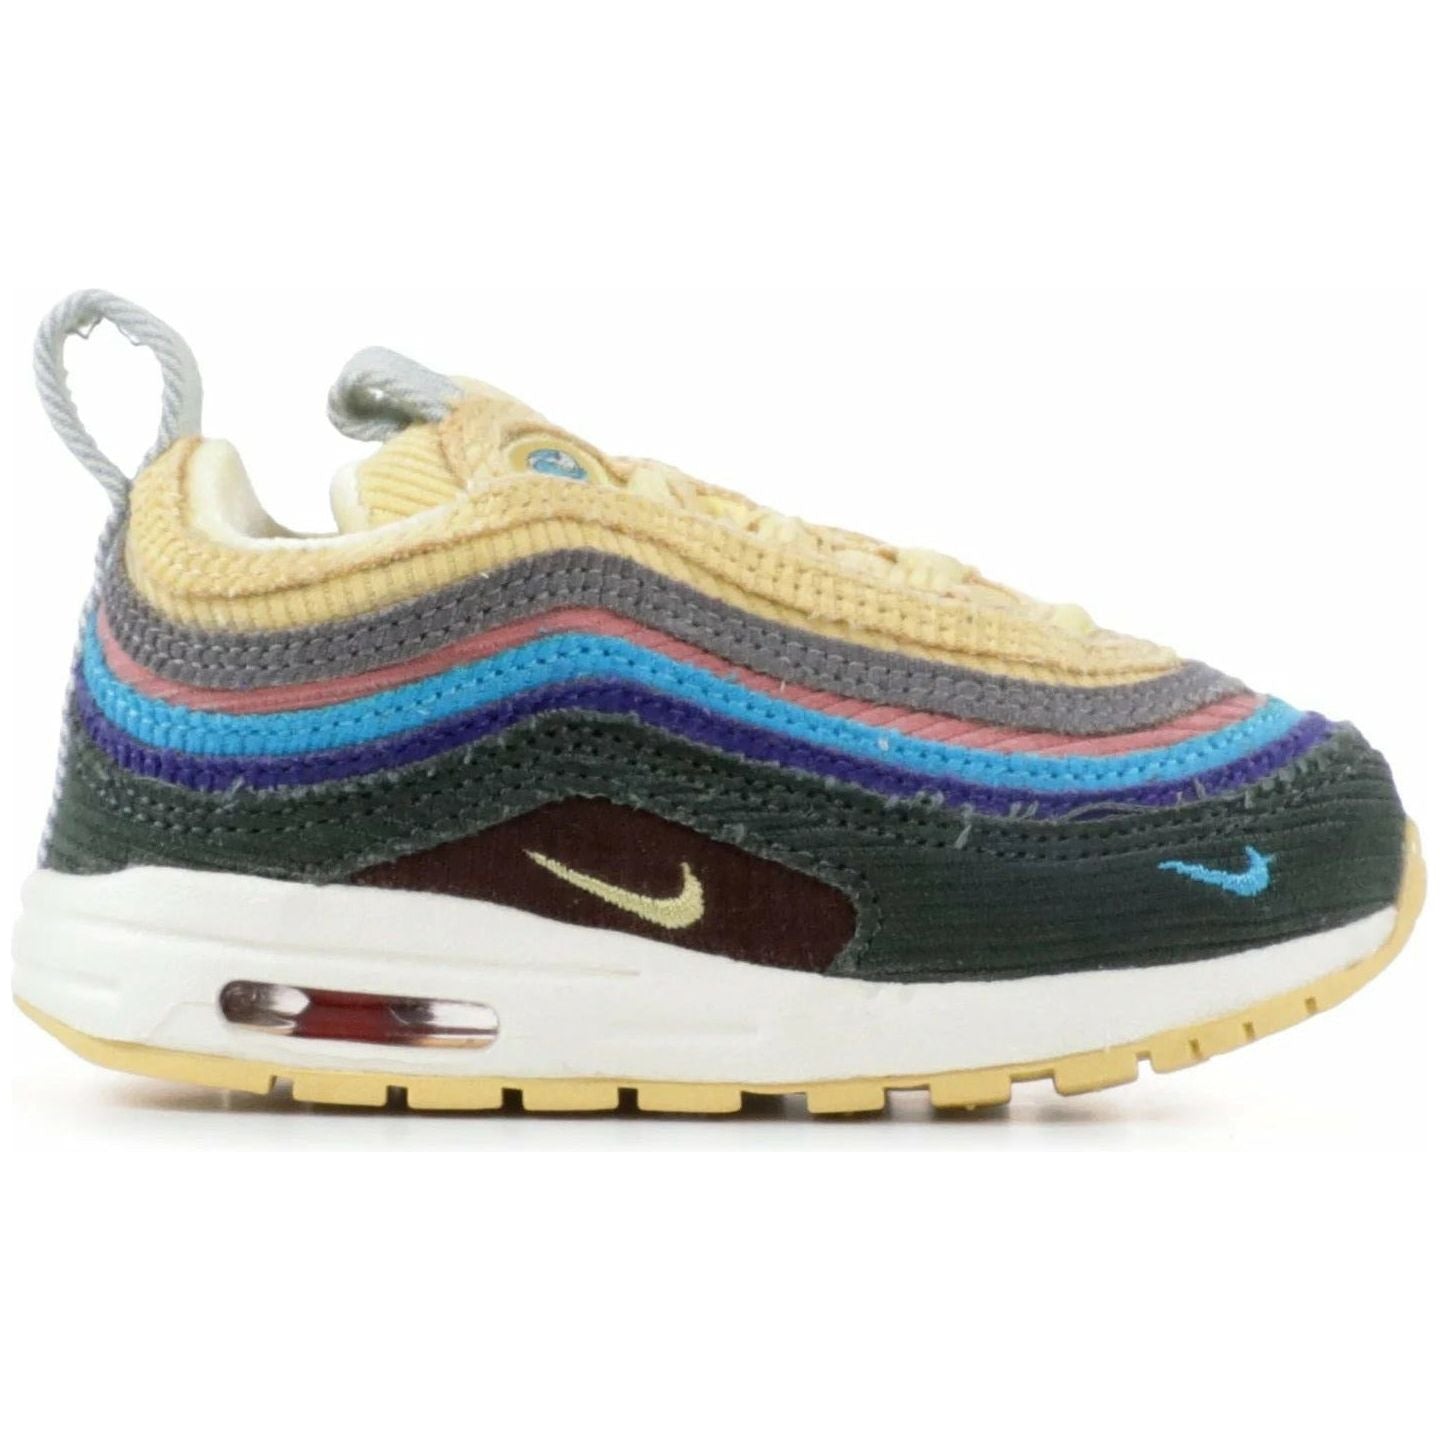 Infant Air Max 1/97 Sean Wotherspoon from Nike